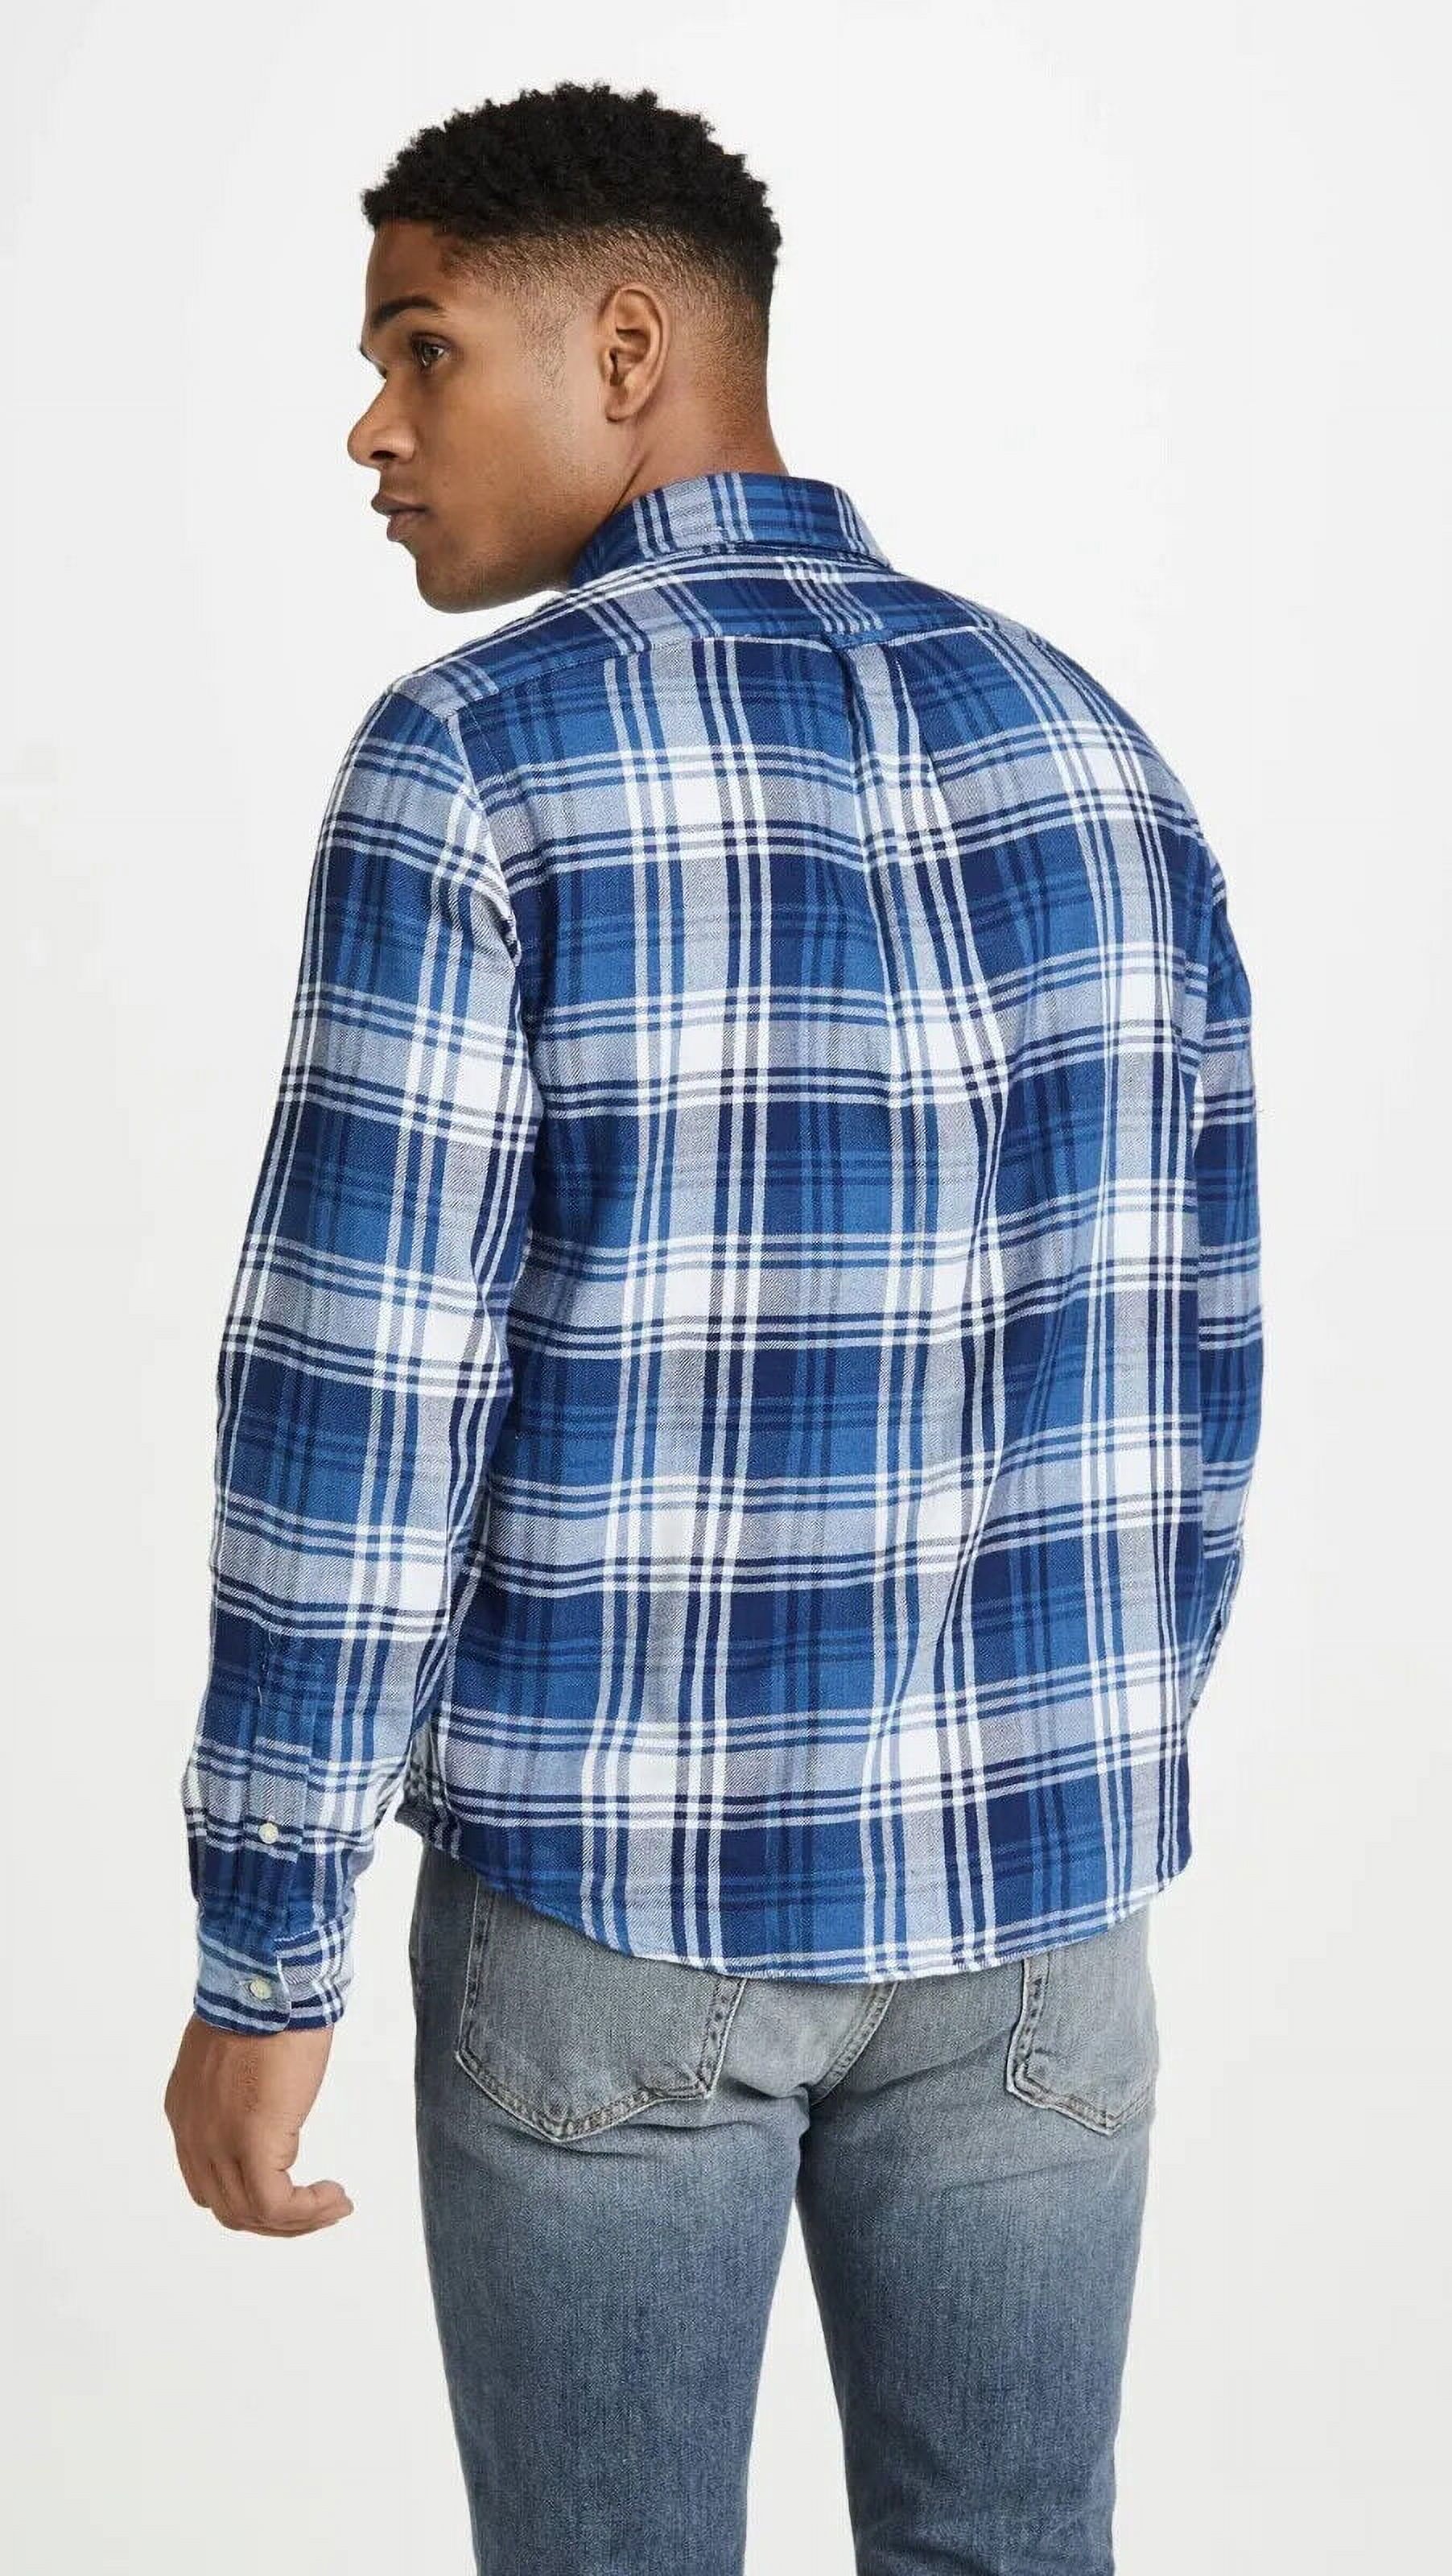 Polo Ralph Lauren Navy White Long Sleeves Flannel Plaid Shirt Blue/White-Size XS - image 3 of 6